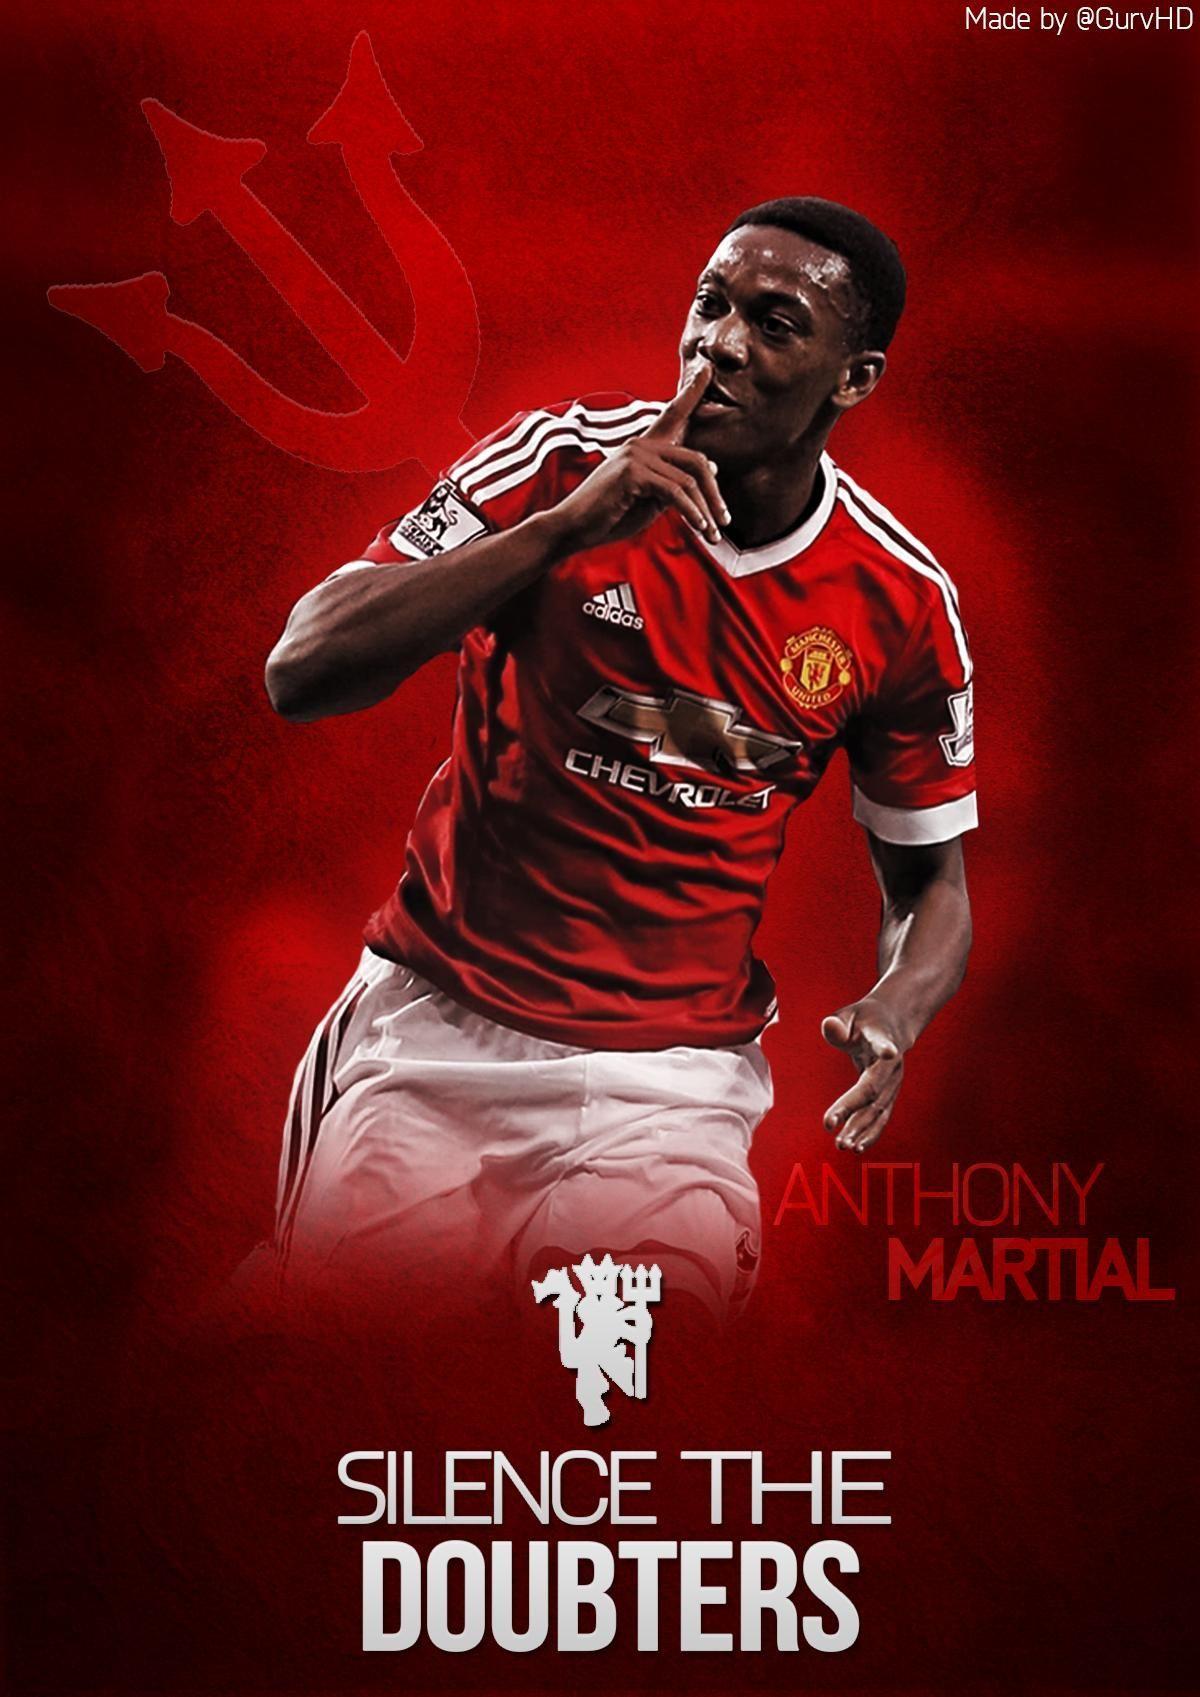 Anthony Martial Wallpaper. Anthony martial, Manchester